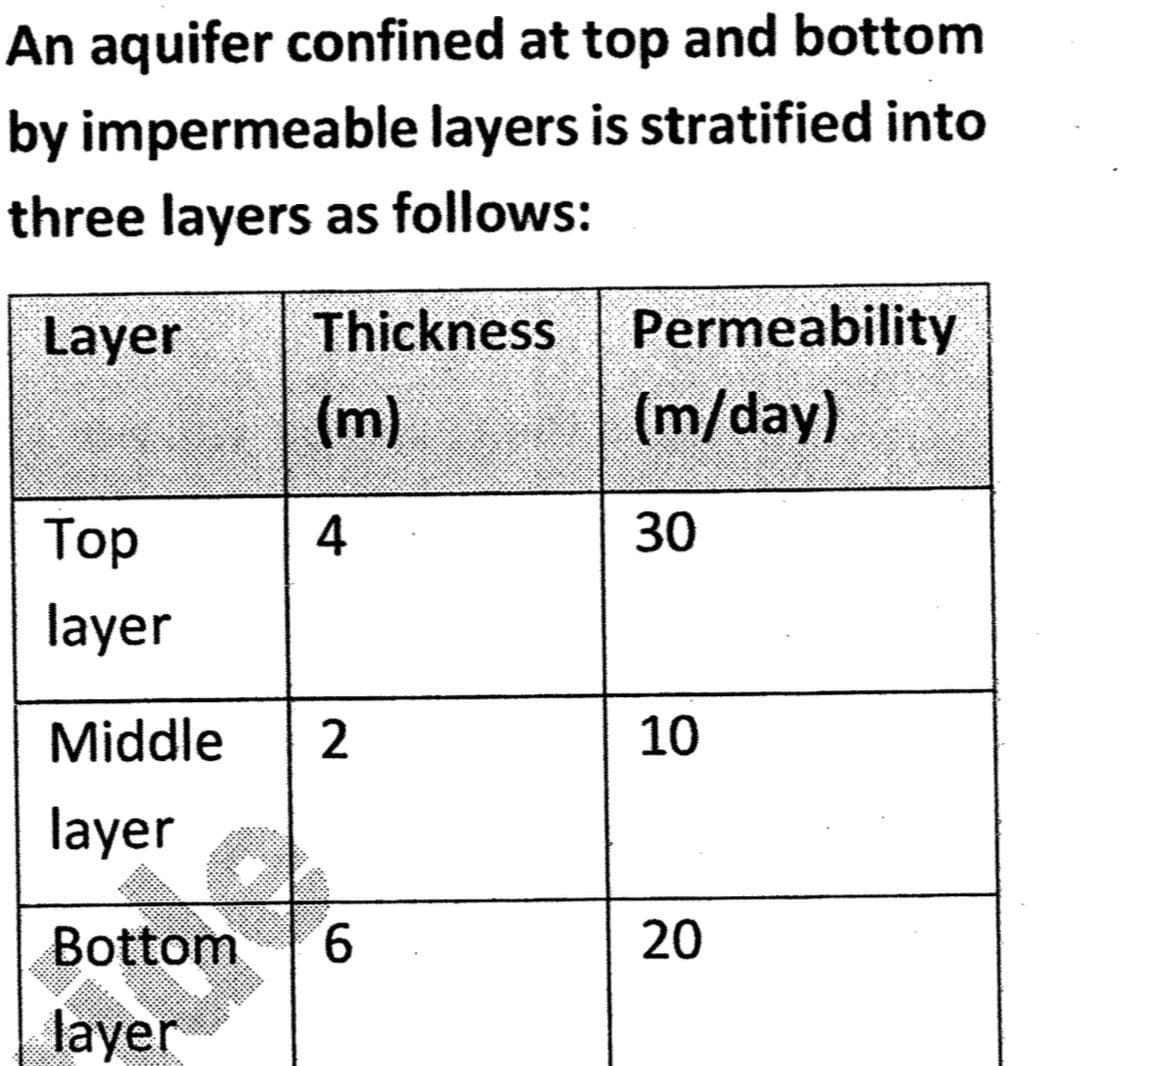 An aquifer confined at top and bottom
by impermeable layers is stratified into
three layers as follows:
Layer Thickness Permeability
(m)
(m/day)
4
Top
layer
Middle 2
layer
Bottom
layer
6
30
10
20